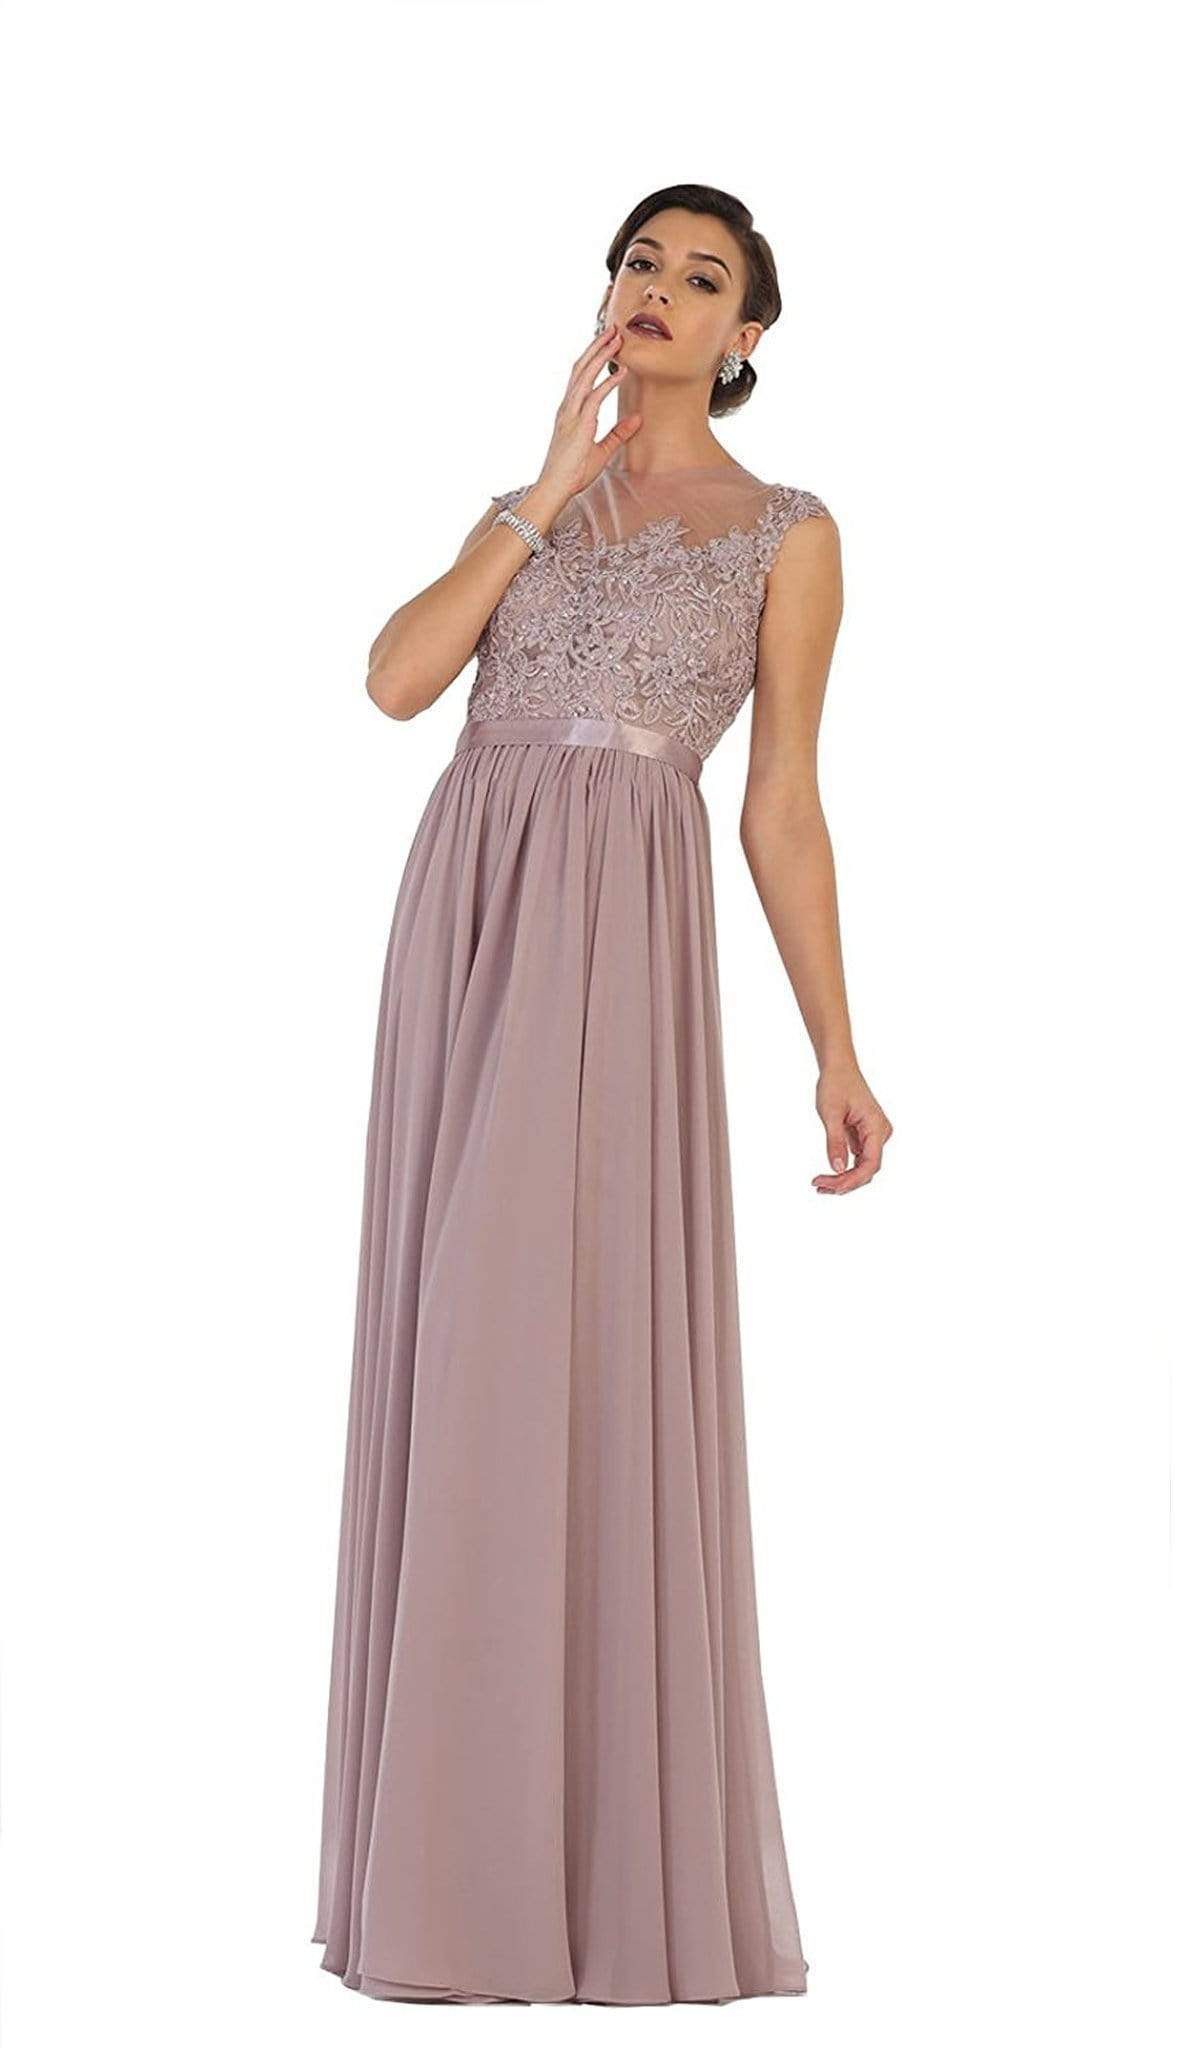 Image of May Queen - Dainty Cap Sleeve Lace Applique Illusion Prom Gown